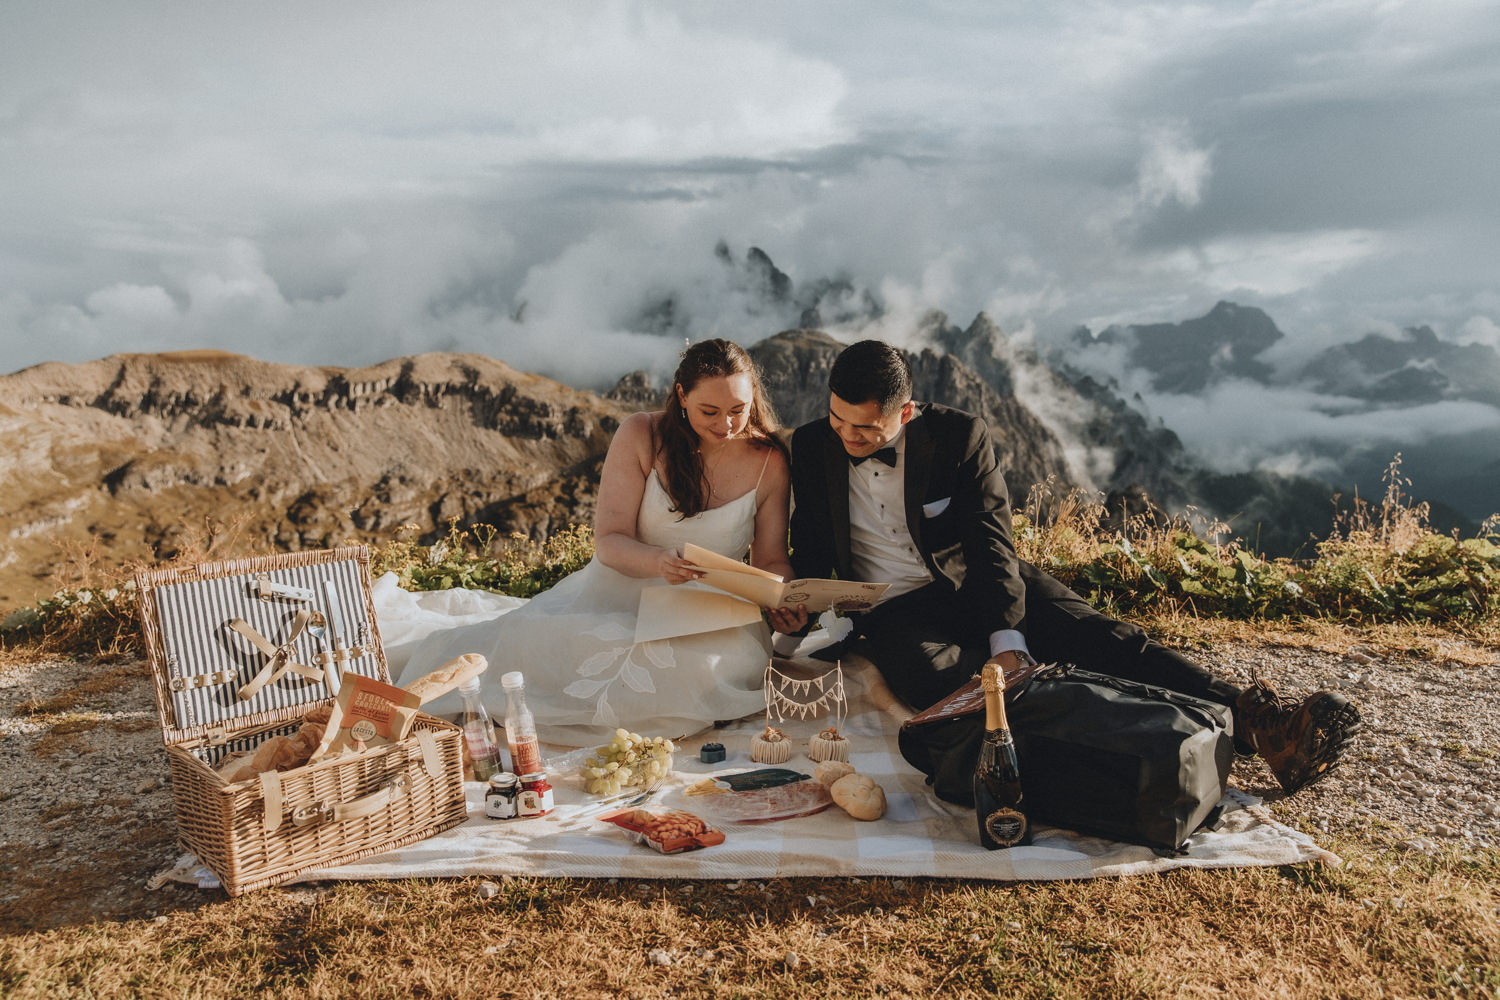 A couple sit having a picnic in the middle of the frame, reading letters during their elopement. They are framed by the jagged, mist covered mountain peaks of the Cadini di Misurina range in Tre Cime national park.